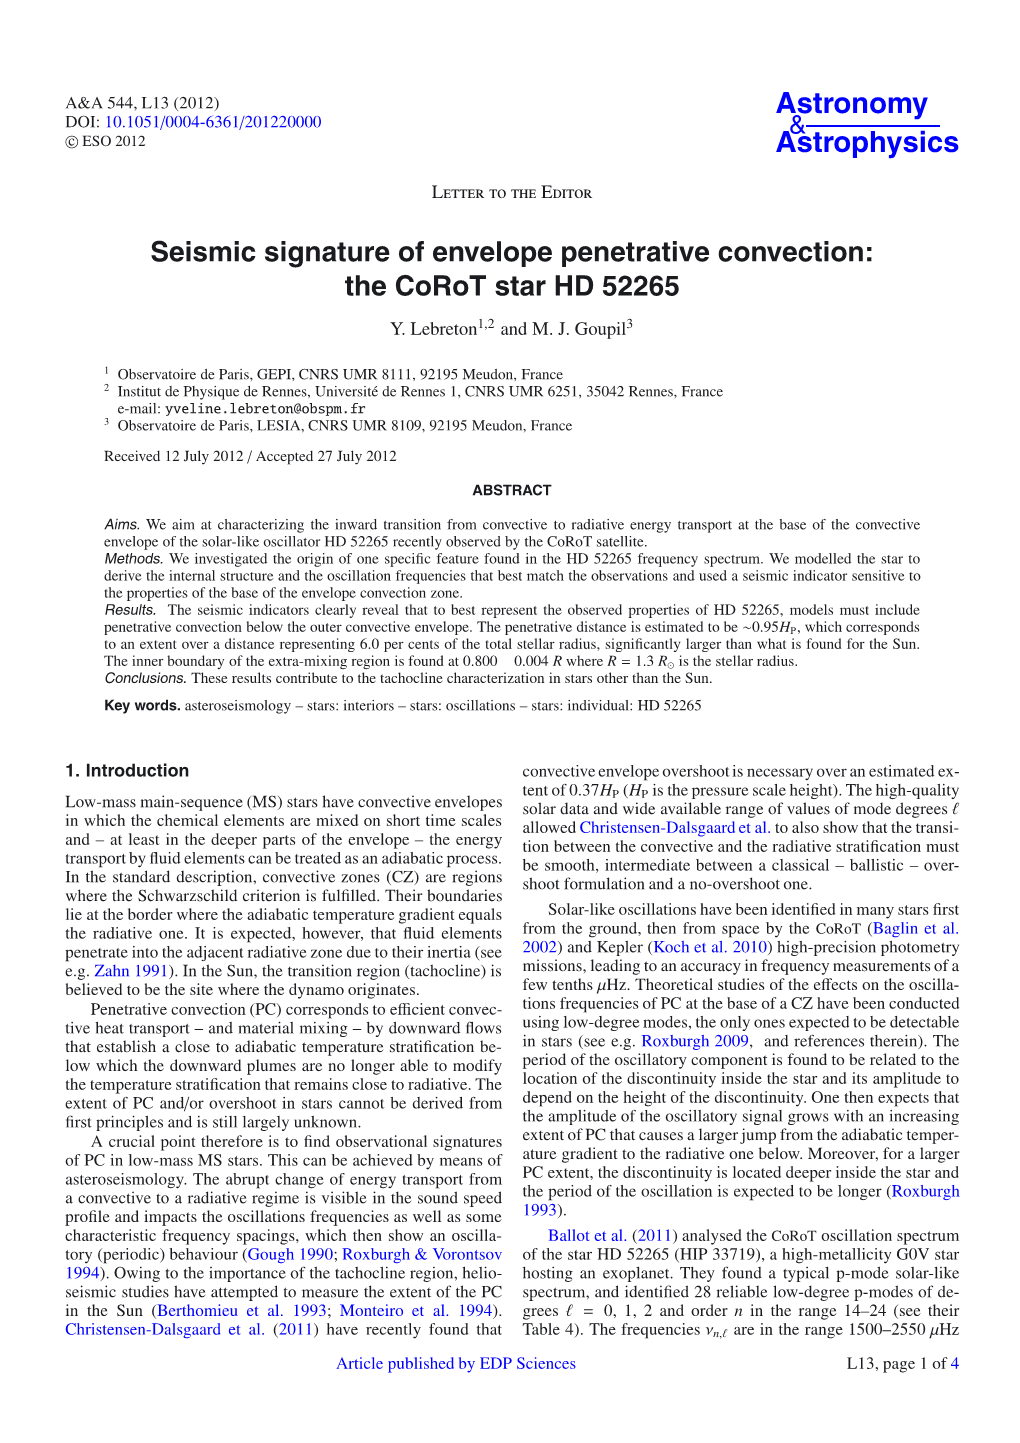 Seismic Signature of Envelope Penetrative Convection: the Corot Star HD 52265